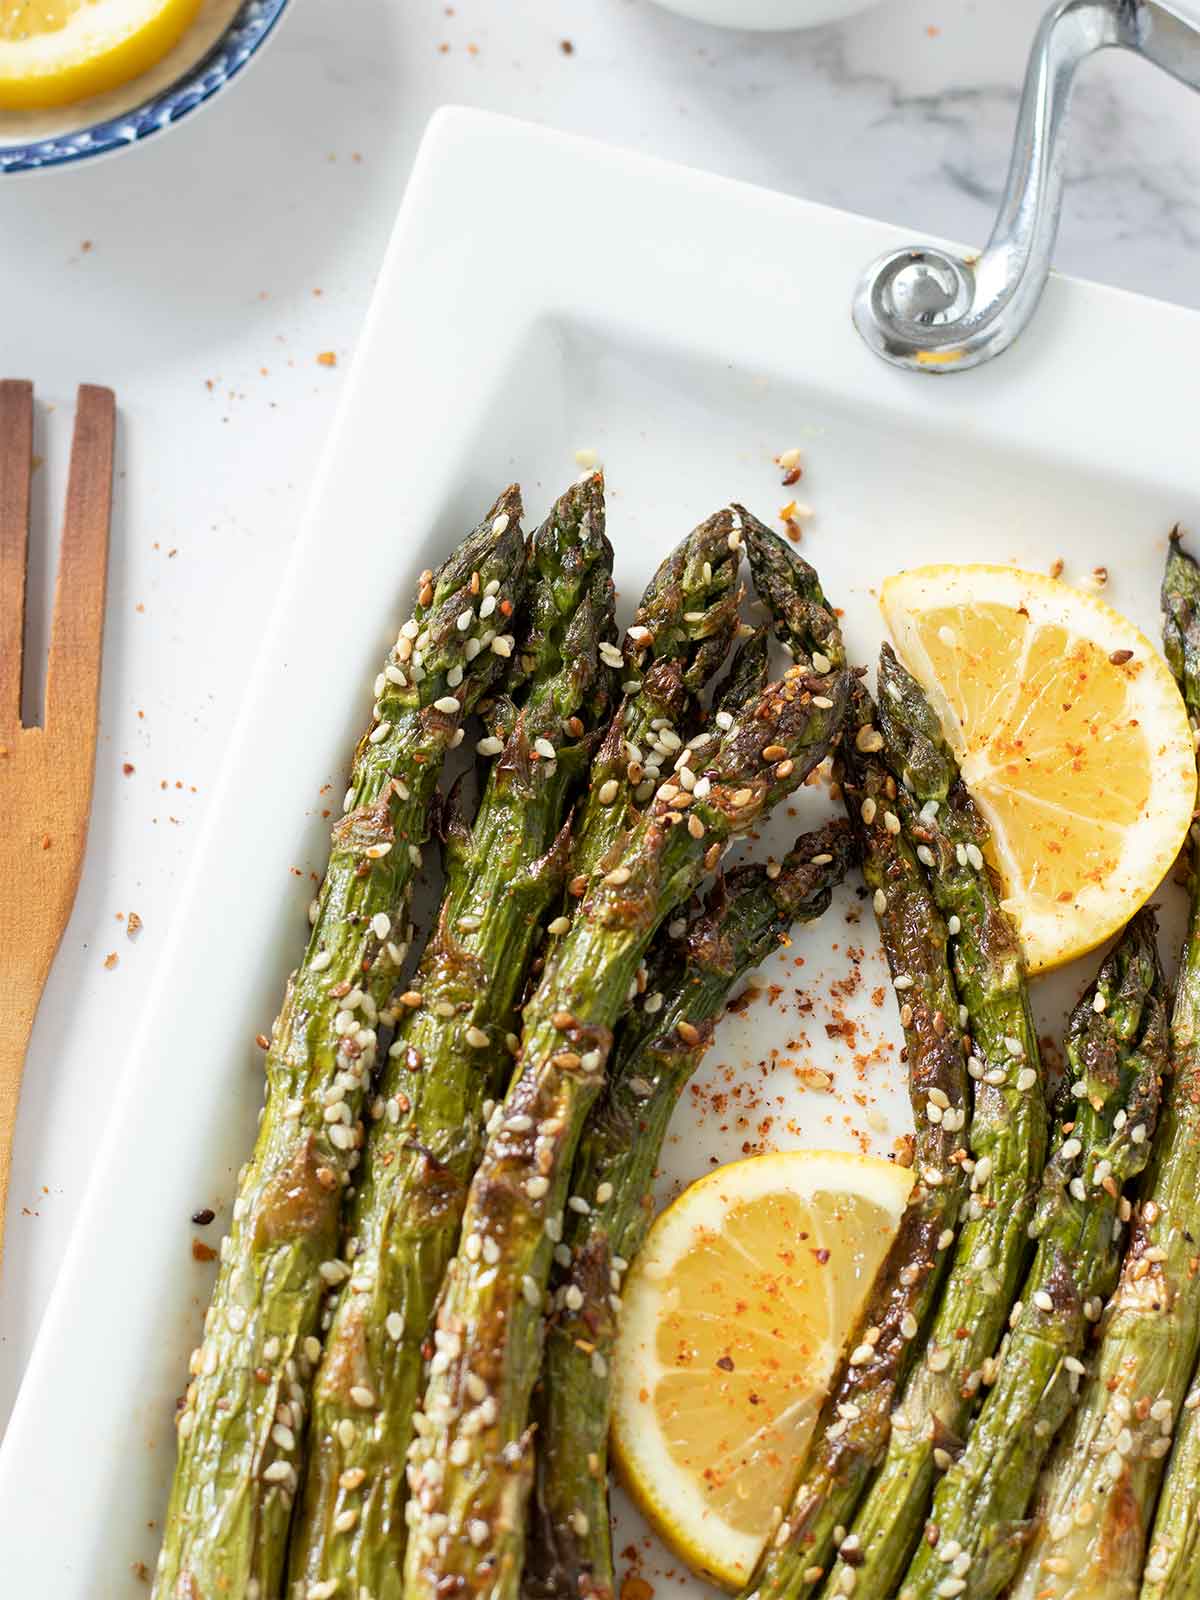 Healthy vegan oven-roasted asparagus on white plate sprinkled with red pepper flakes and drizzled freshly squeezed lemon juice and wooden fork on white table